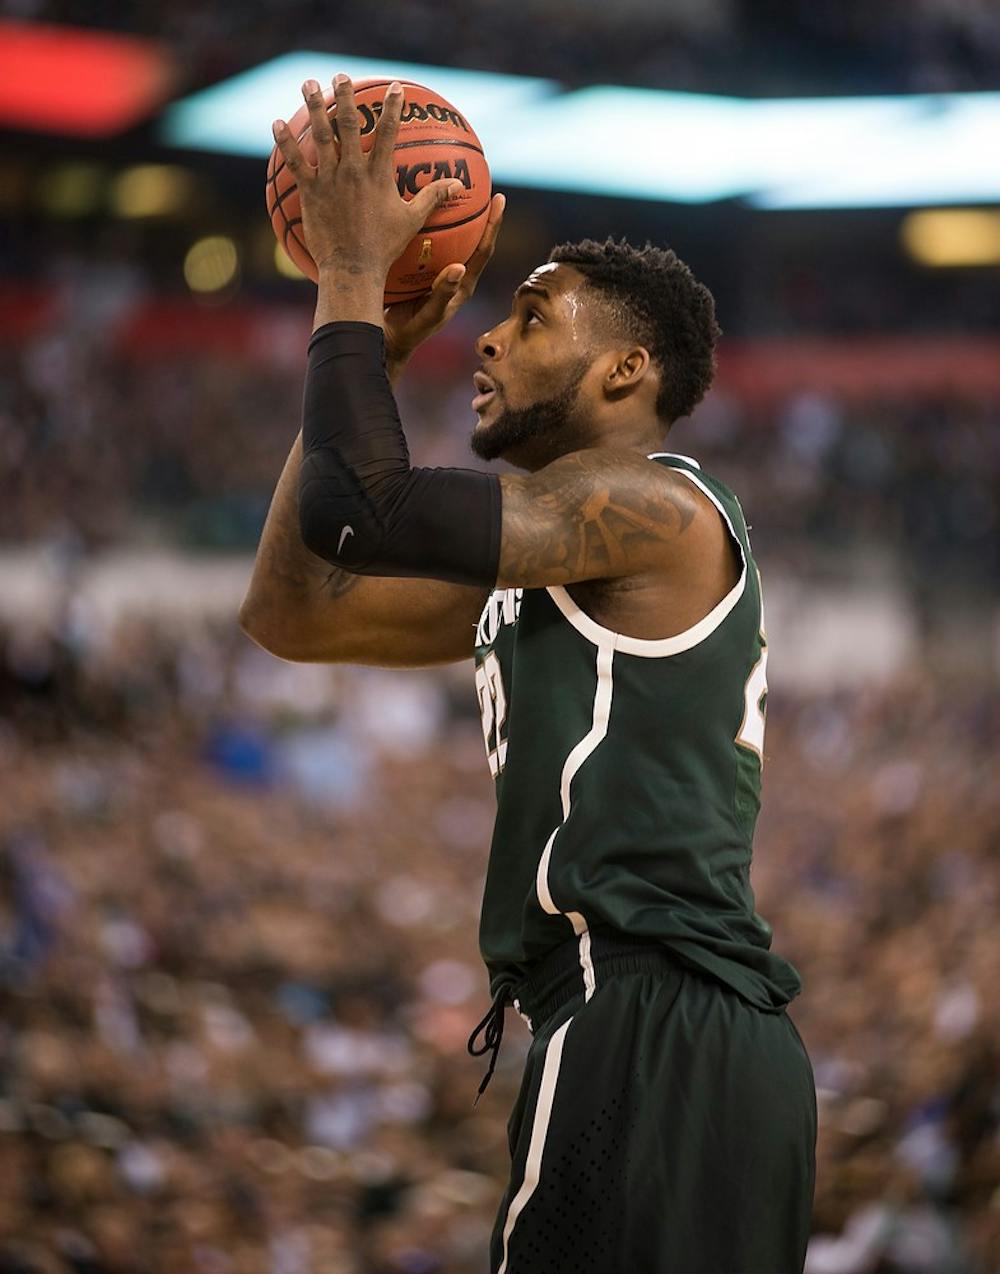 <p>Senior forward Branden Dawson attempts a basket April 4, 2015, during the semi-final game of the NCAA Tournament in the Final Four round at Lucas Oil Stadium in Indianapolis, Indiana. The Spartans were defeated by the Blue Devils, 81-61. Erin Hampton/The State News</p>